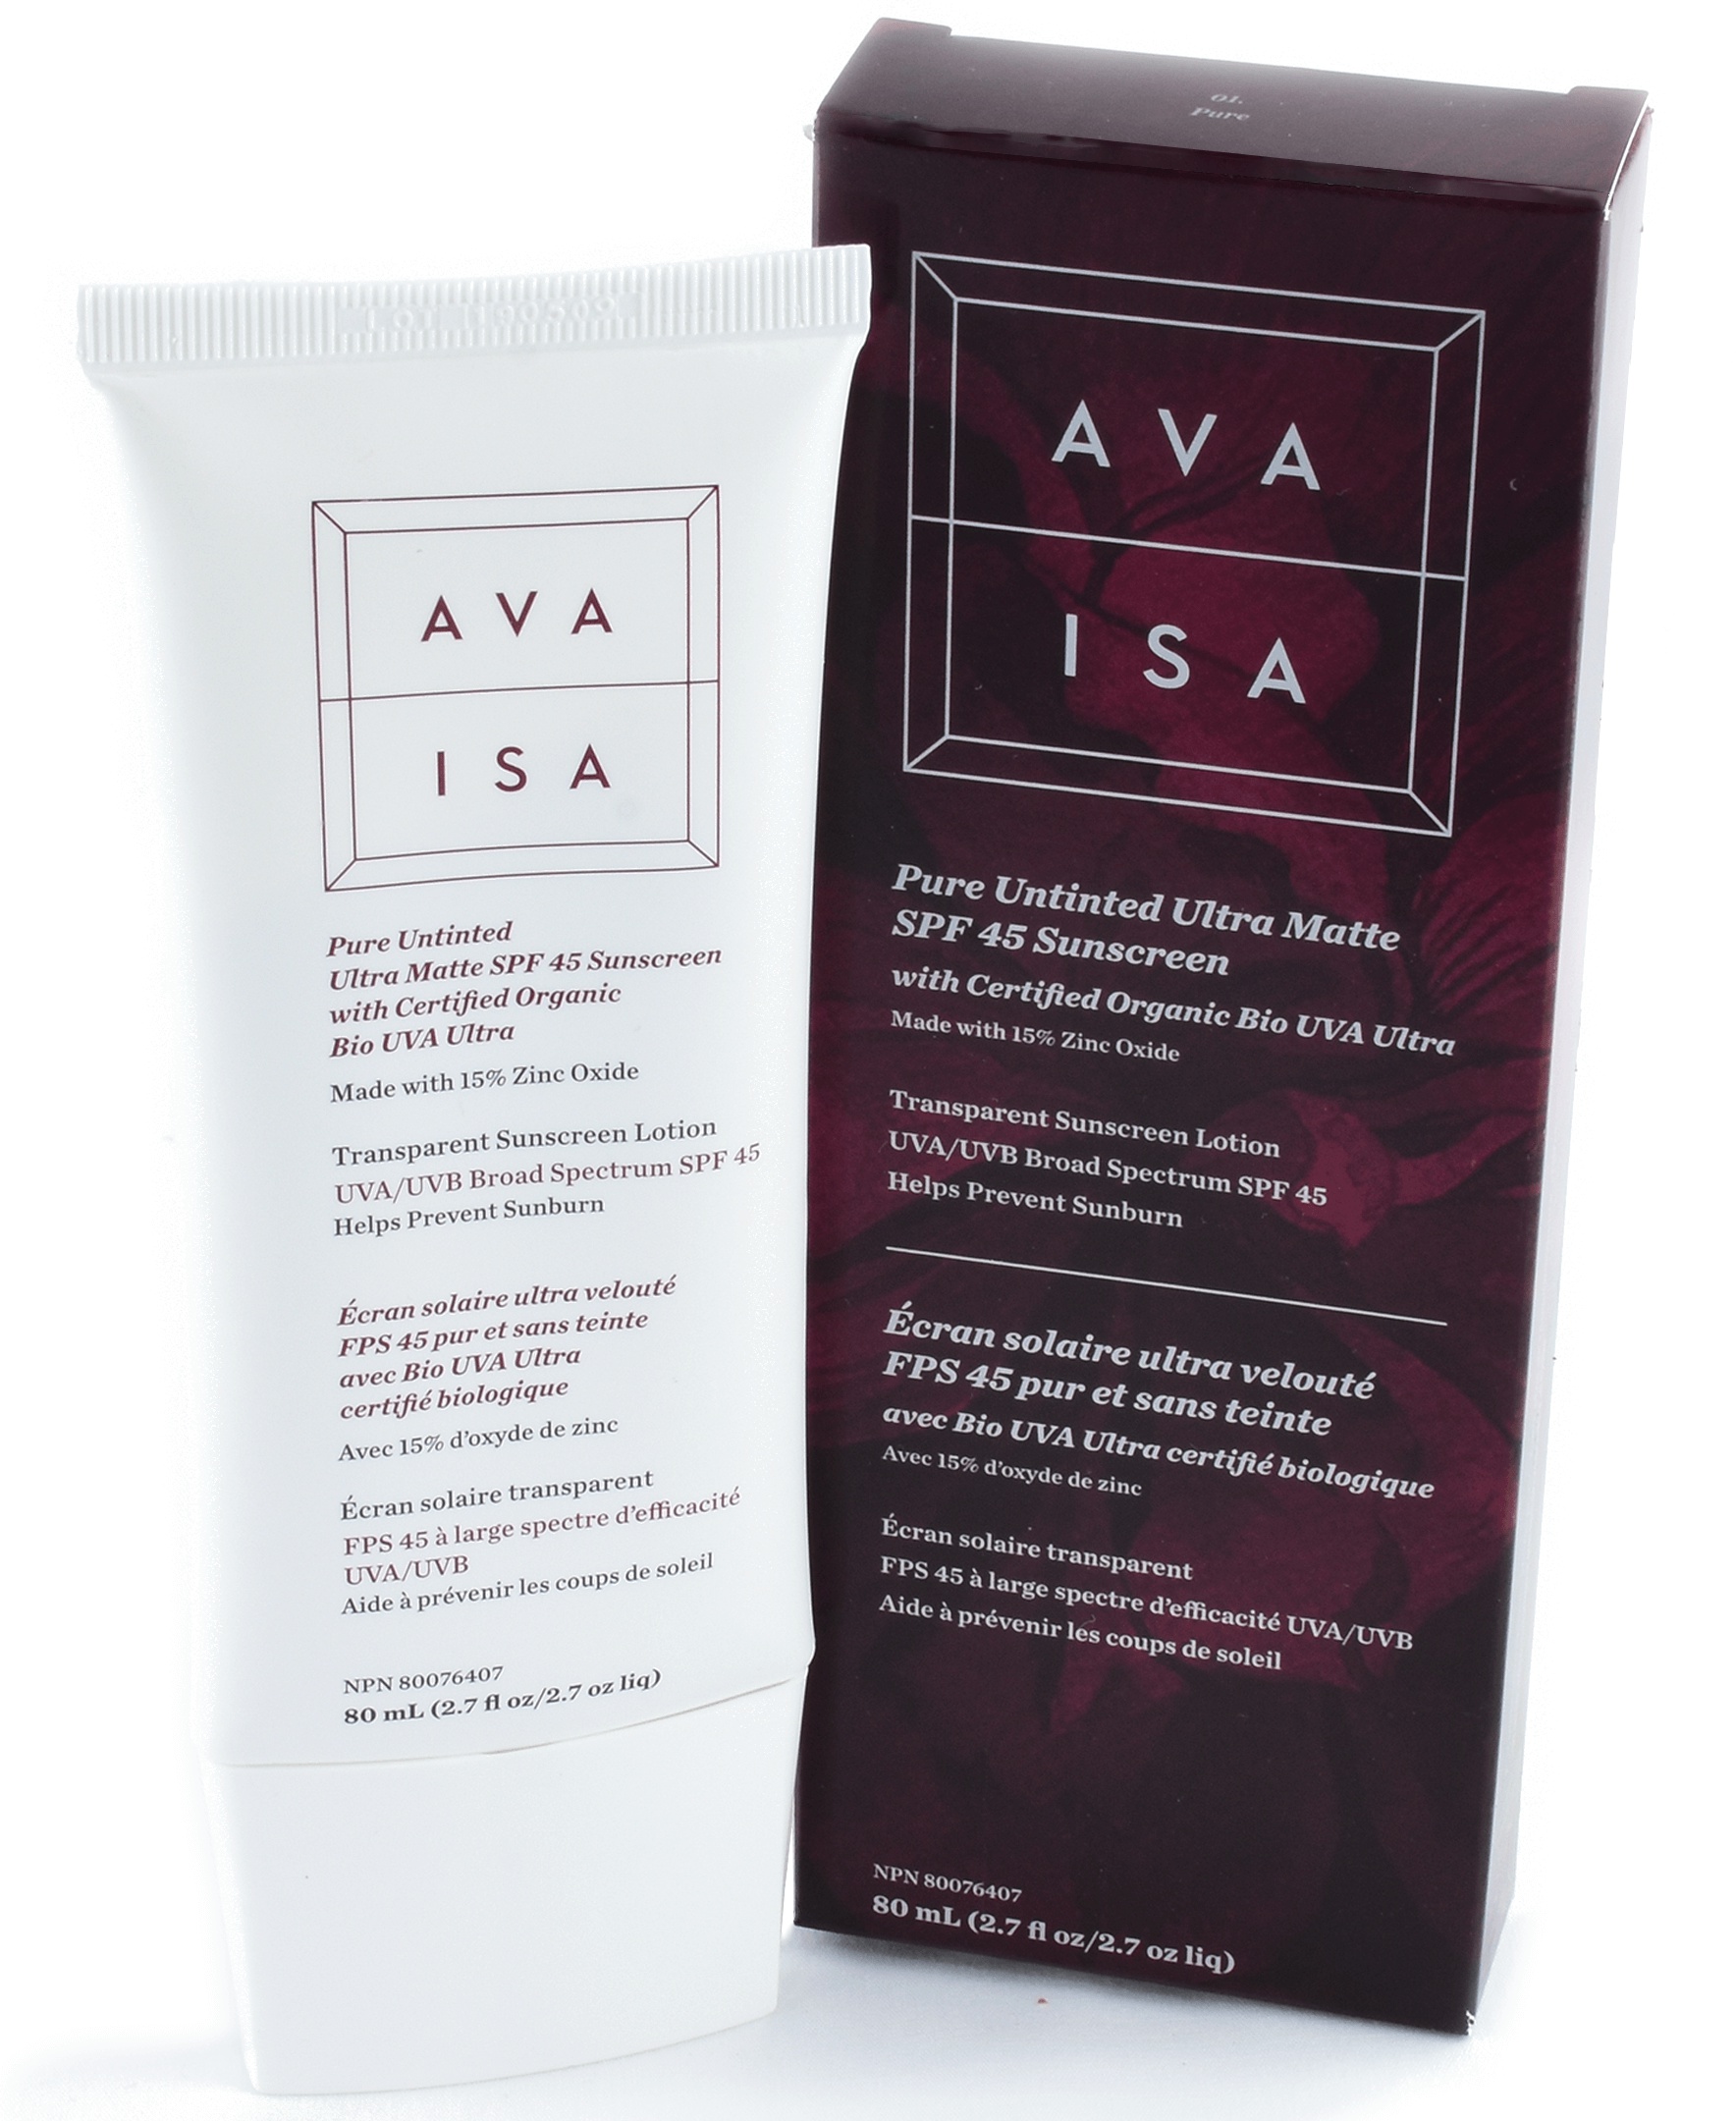 Ava Isa Pure Untinted Ultra Matte Spf 45 Sunscreen